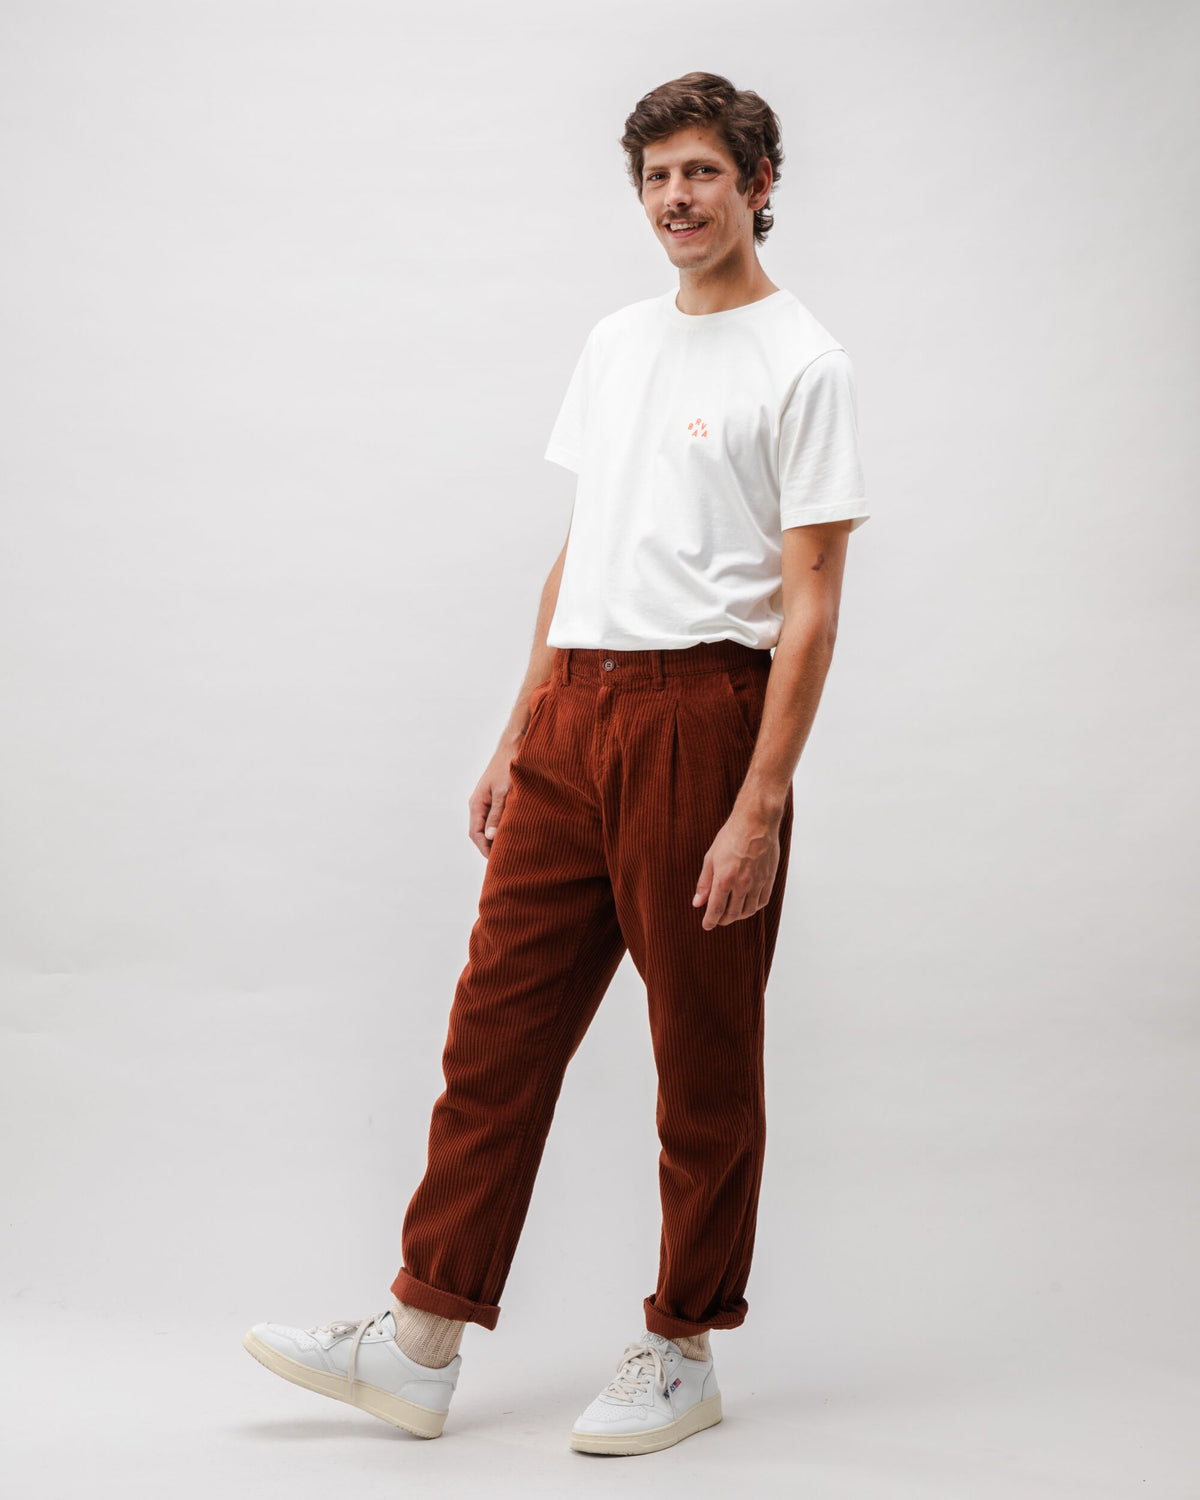 Red Corduroy Pants Outfits For Men (44 ideas & outfits)